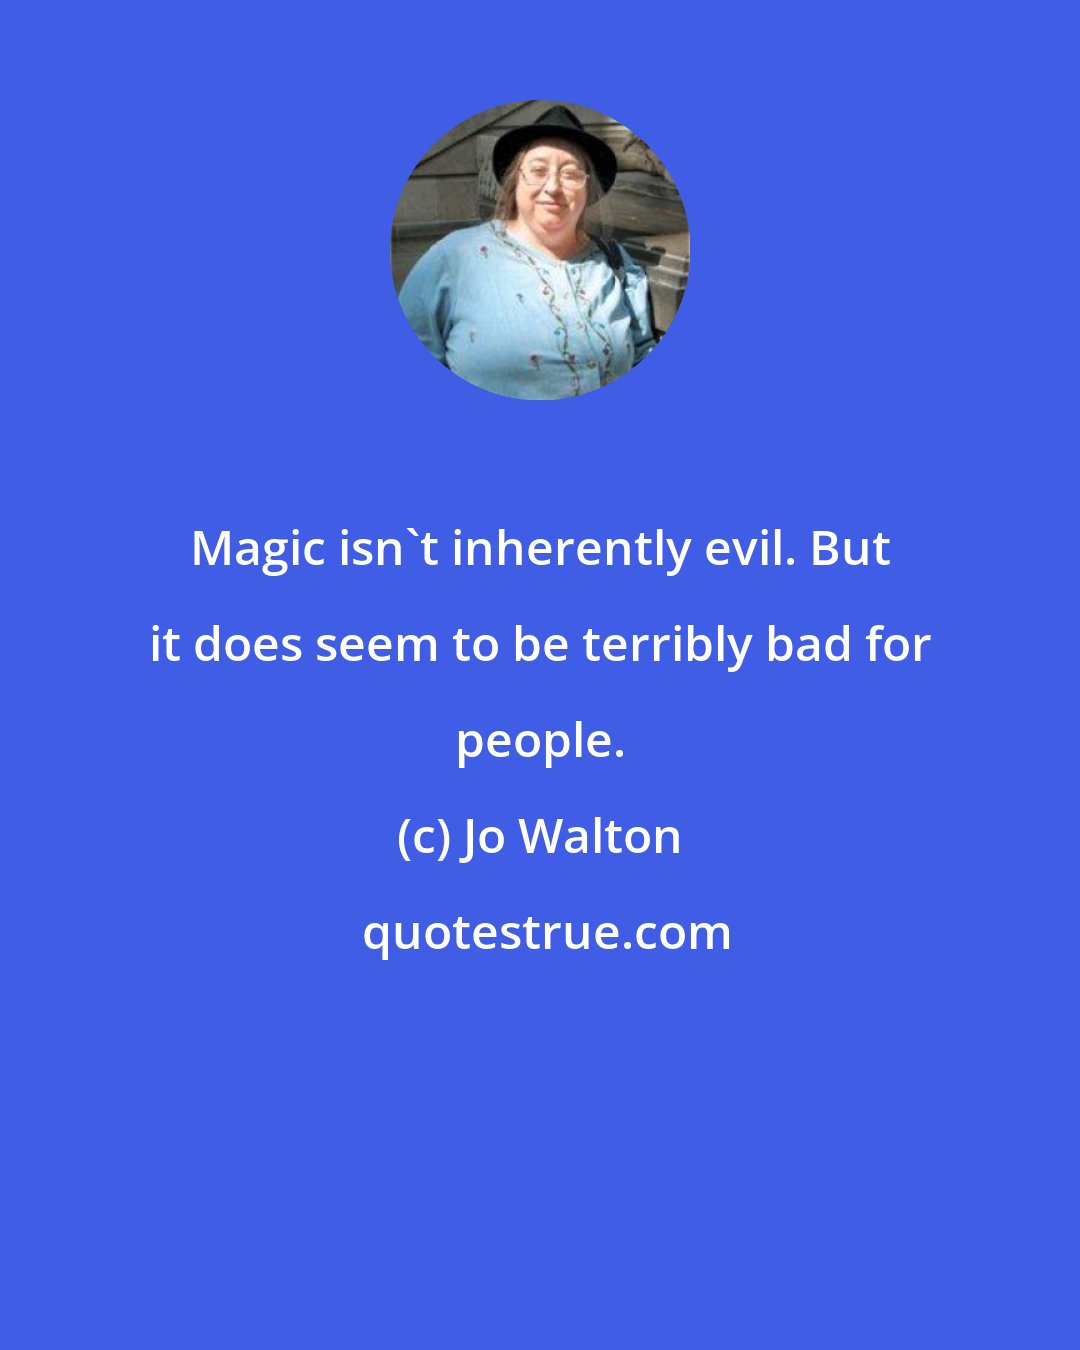 Jo Walton: Magic isn't inherently evil. But it does seem to be terribly bad for people.